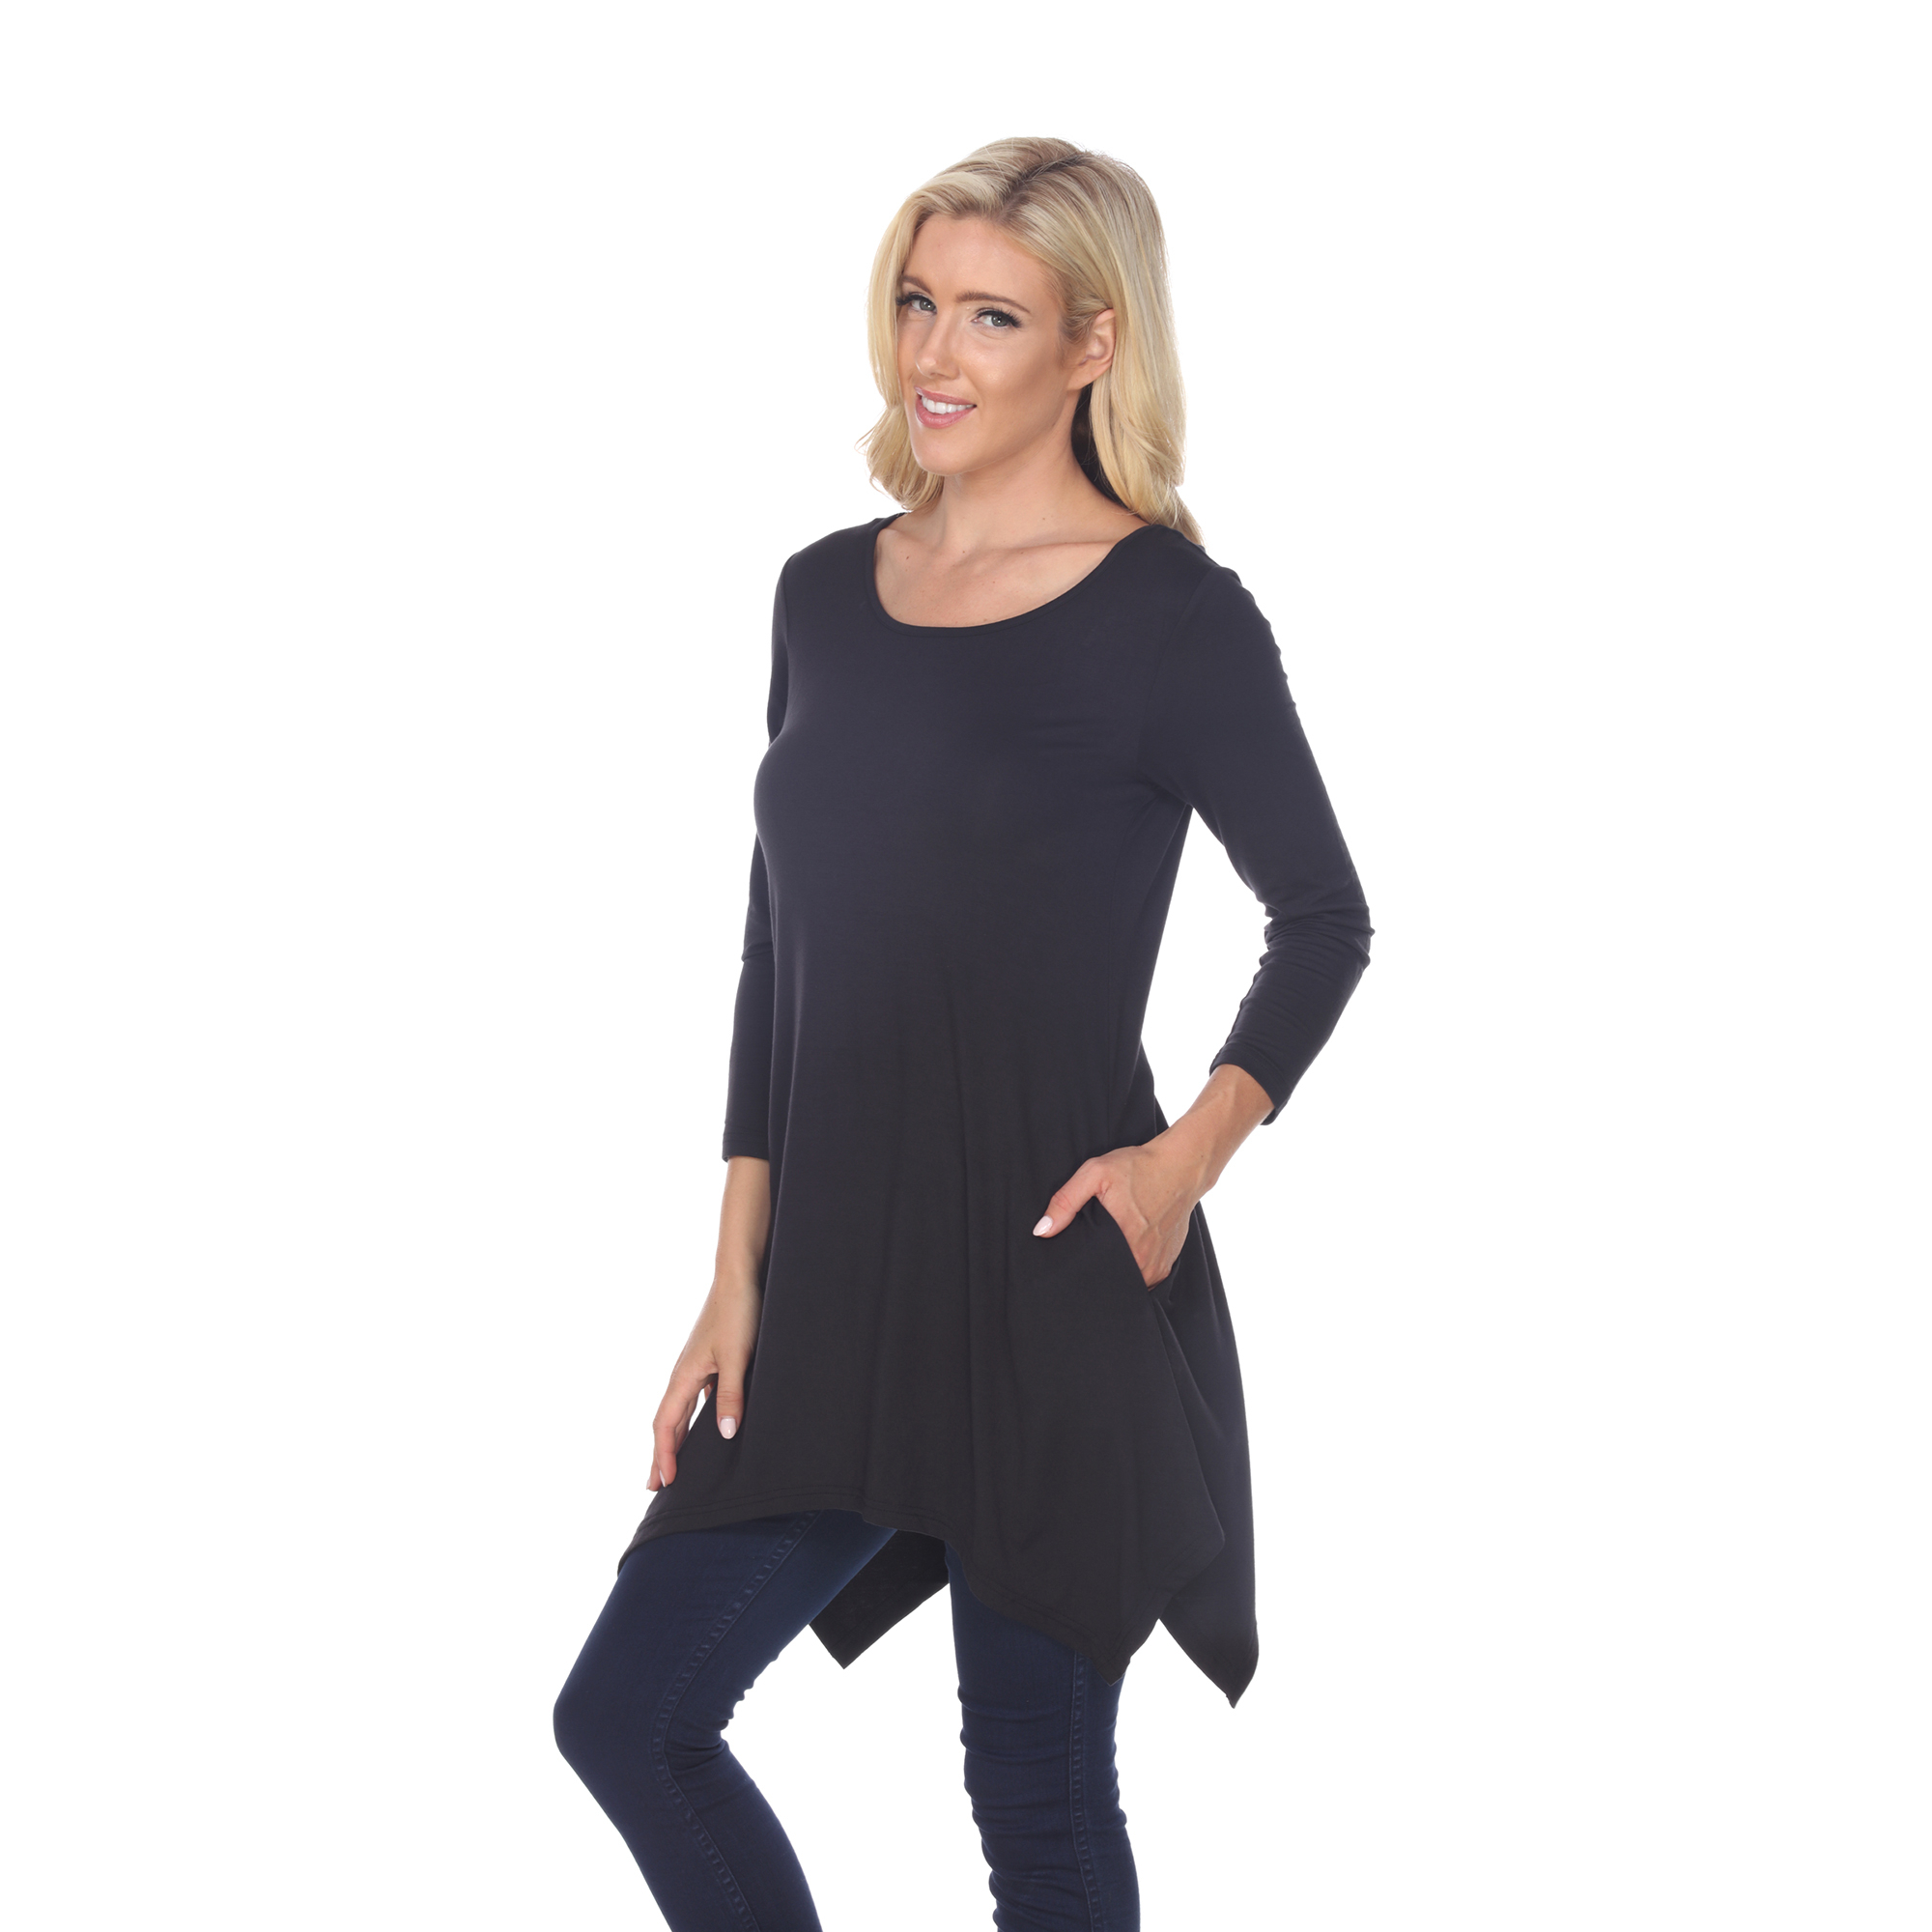 White Mark Women's Quarter Sleeve Tunic Top With Pockets - Navy, 2X